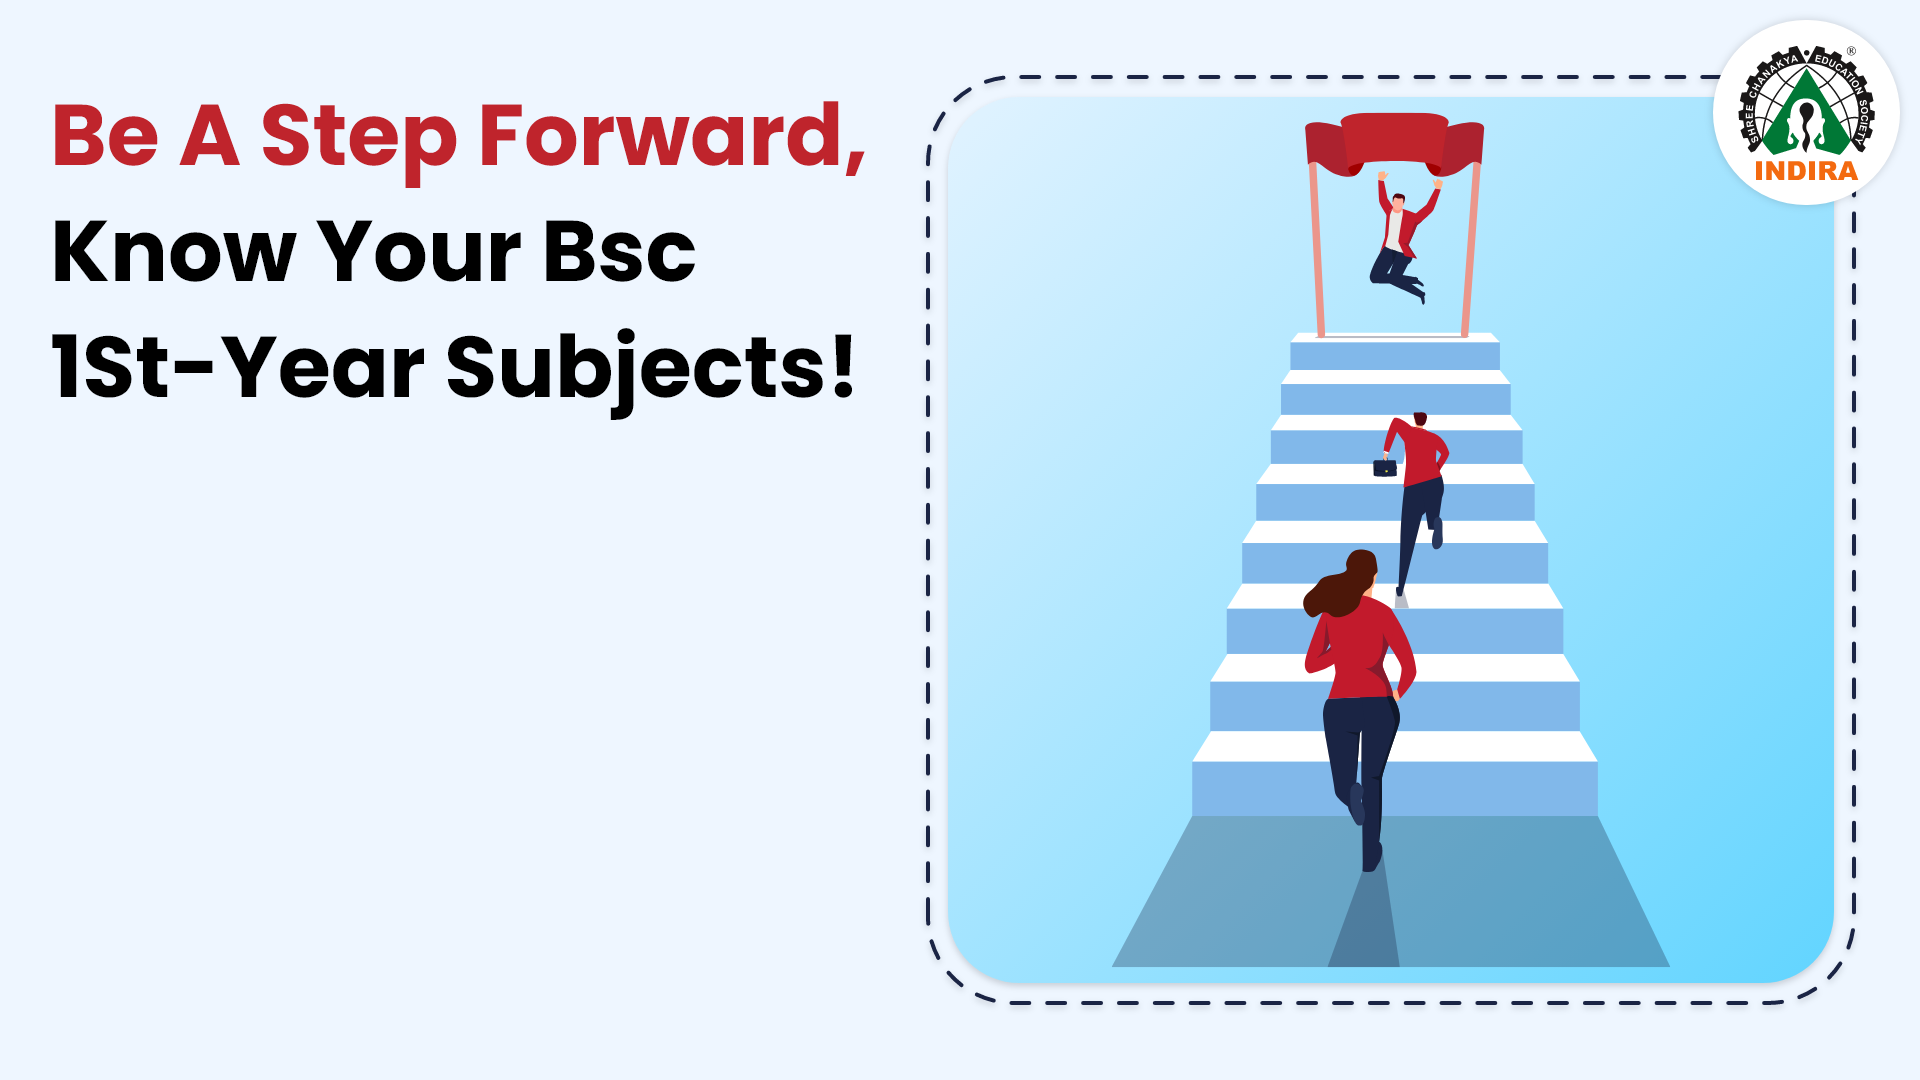 Be A Step Forward, Know Your BSc 1st Year Subjects!